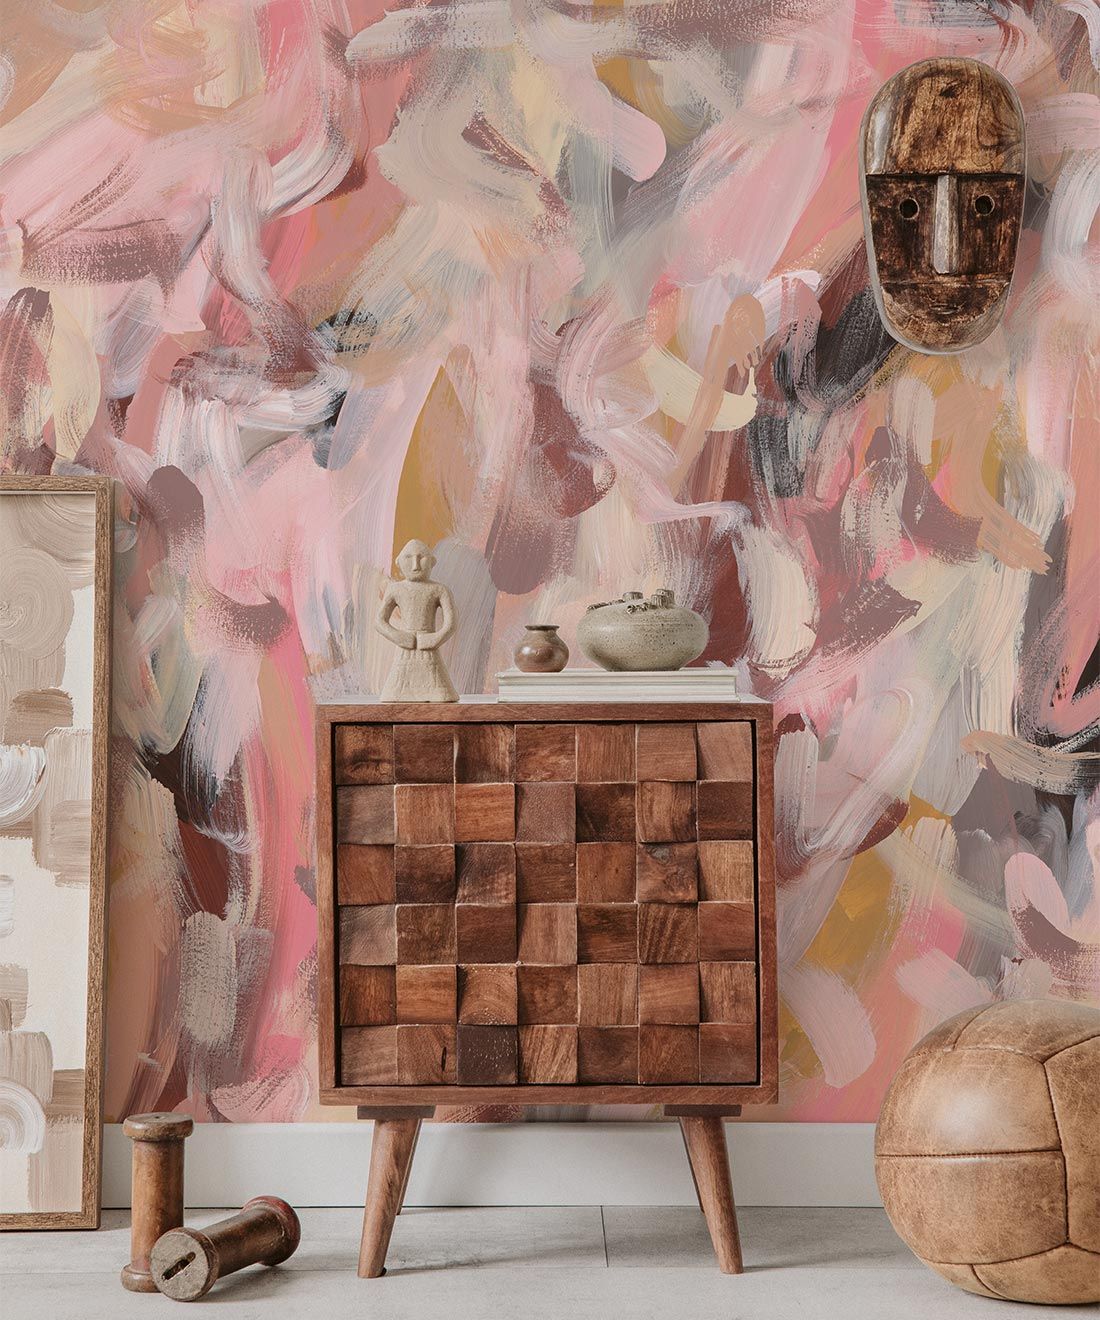 He Said She Said Wallpaper • Tiff Manuell • Abstract Painting Wallpaper • Insitu With table